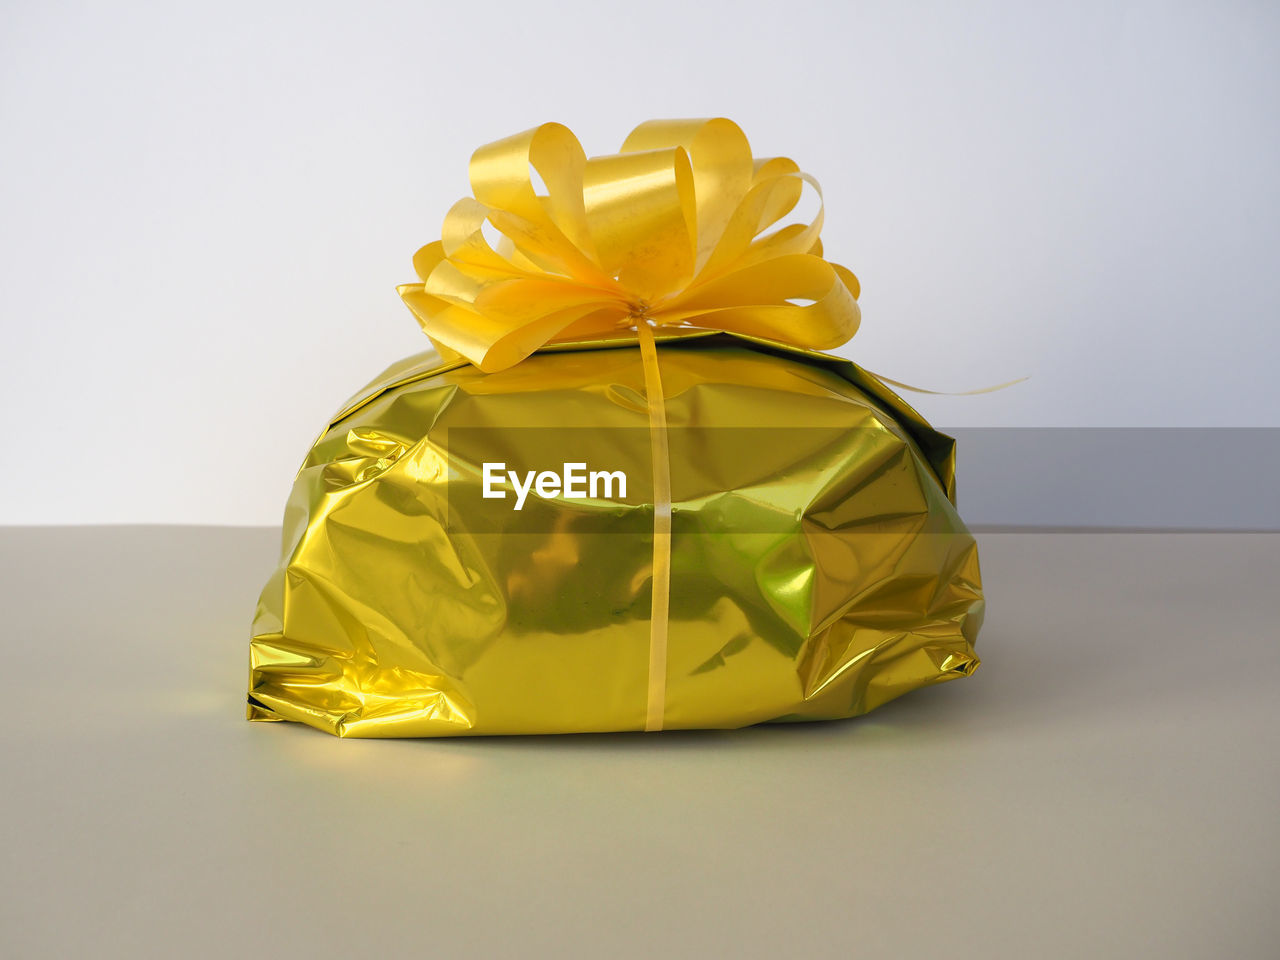 yellow, gift, ribbon, bow, tied bow, celebration, present, gold, wrapping paper, surprise, box, wrapped, holiday, gift box, paper, christmas, studio shot, indoors, container, single object, event, no people, copy space, wedding favors, birthday present, shiny, art, emotion, decoration, still life, anniversary, birthday, cut out, petal, party favor